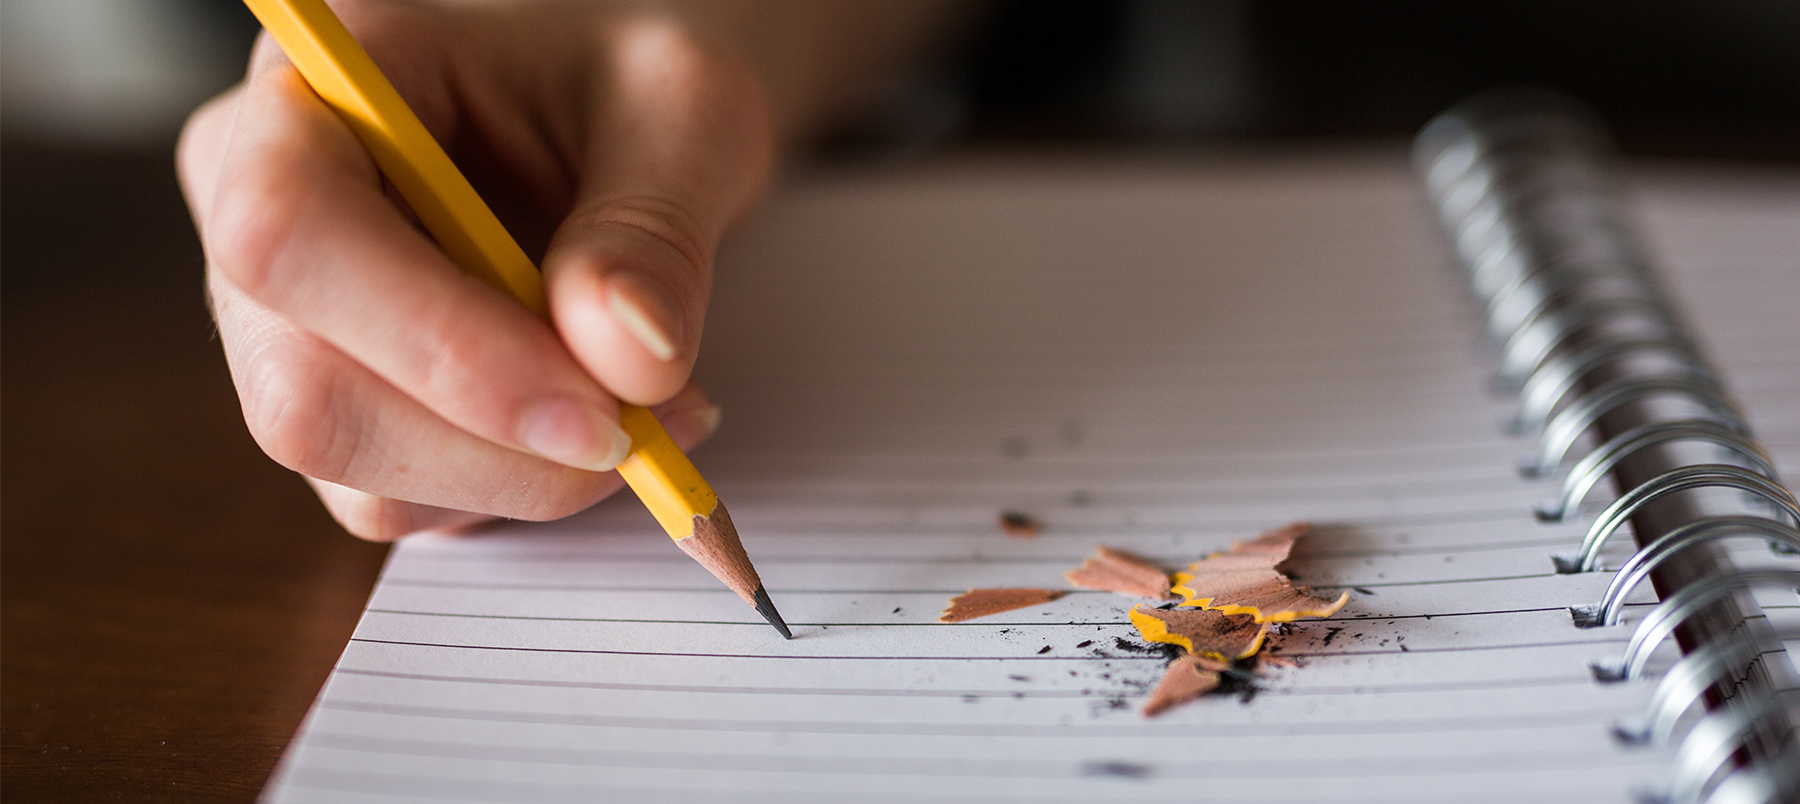 Person writing in a notepad with a pencil, pencil sharpenings on the paper